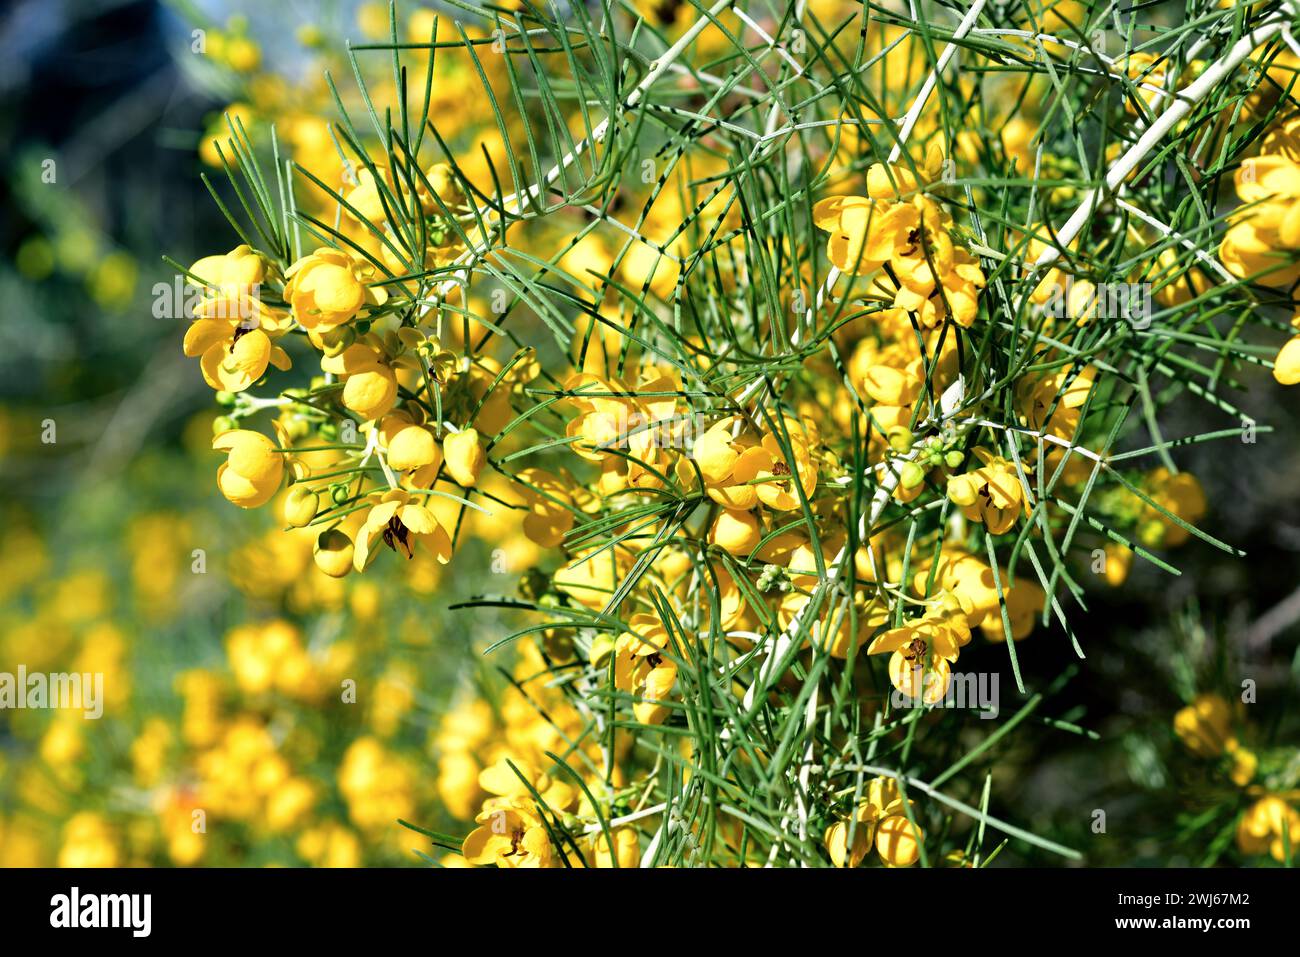 Silver cassia or wormwood cassia (Senna artemisioides) is an evergreen shrub endemic to Australia. Flowers and leaves detail. Stock Photo